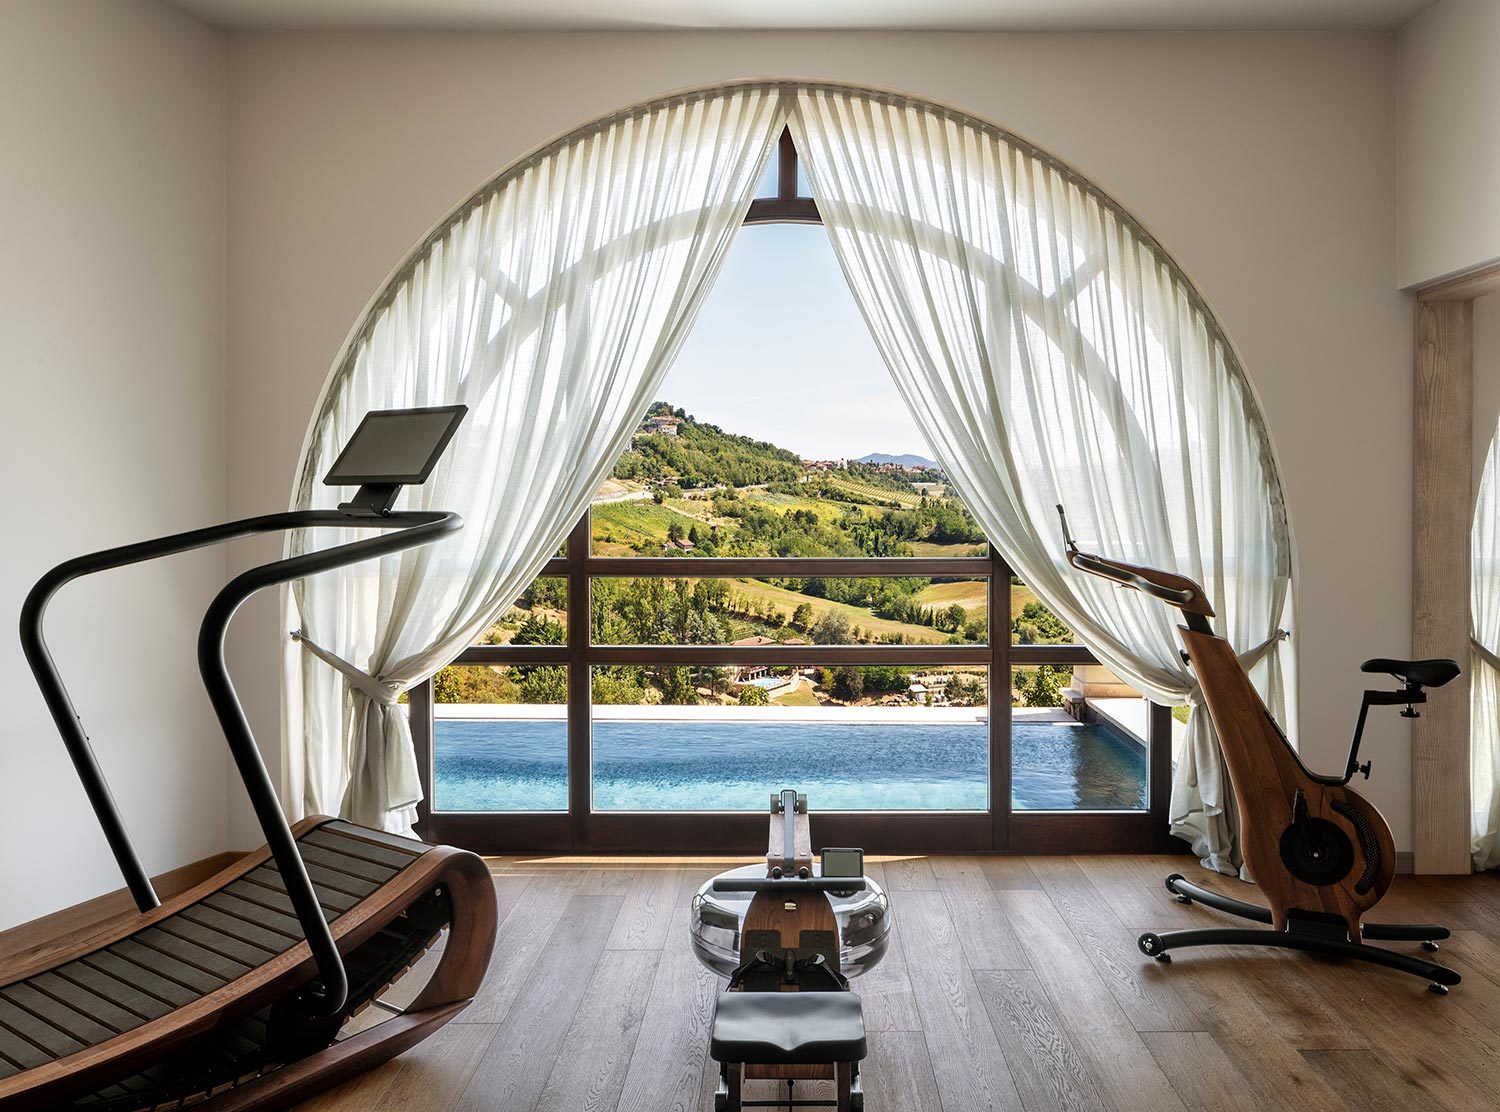 Nordelaia The wooden handcrafted exercise machines in the gym with a view